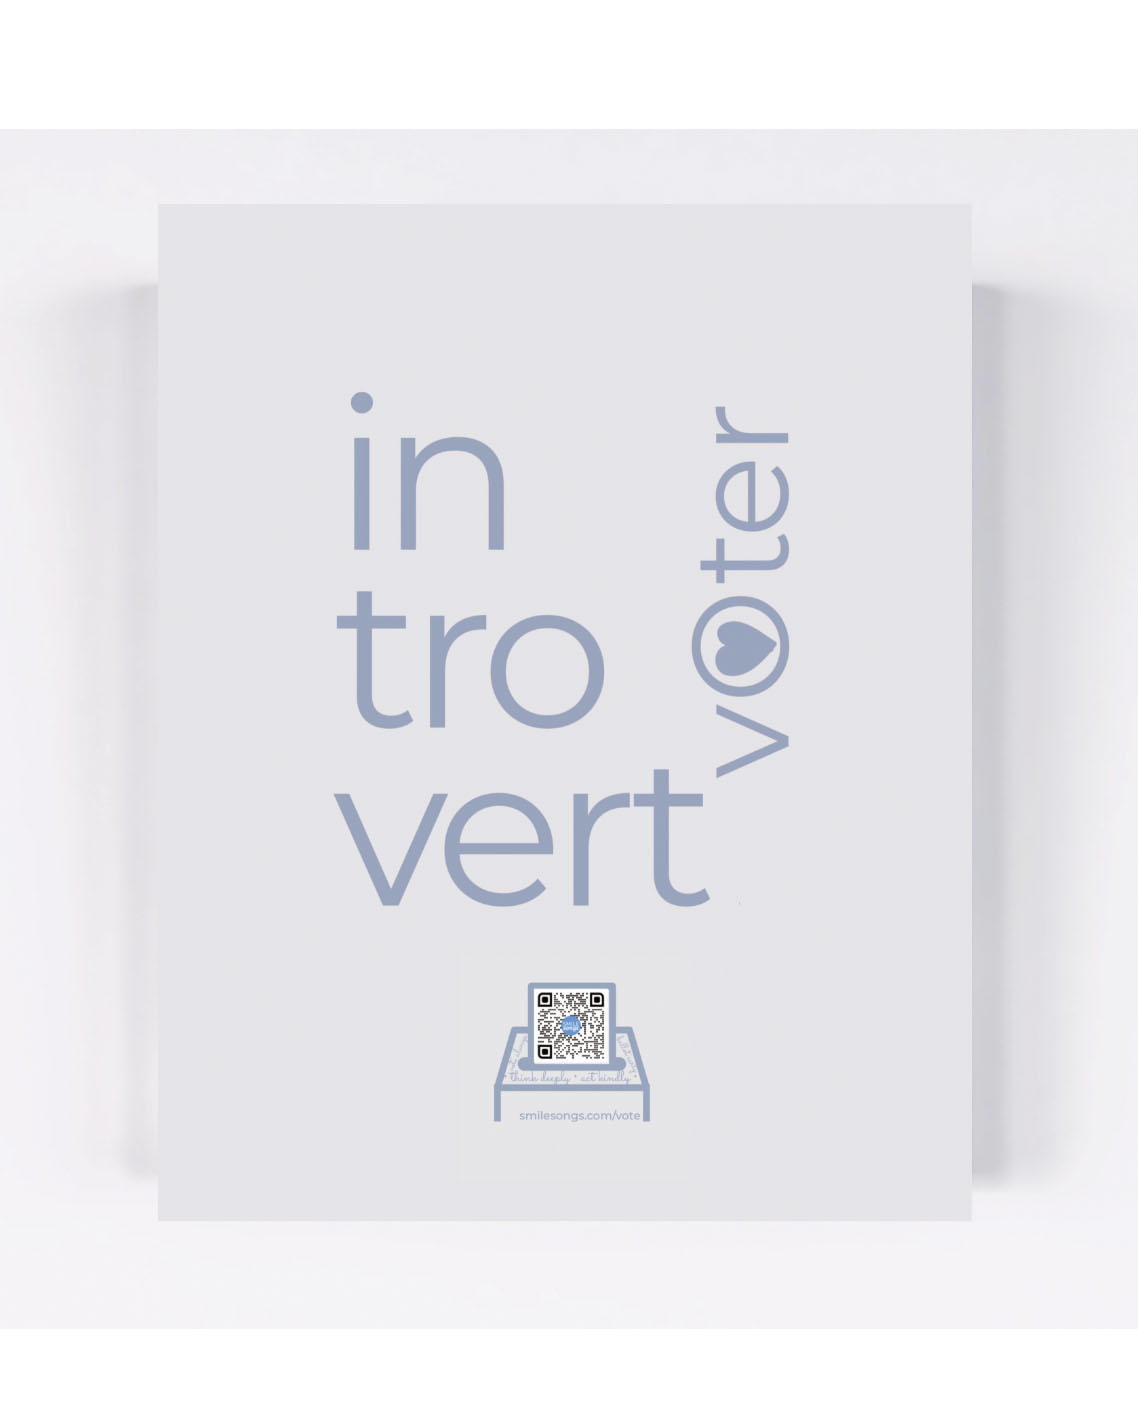 Introvert Voter Art Print with QR Code that links to song 
															/ Smile Songs							